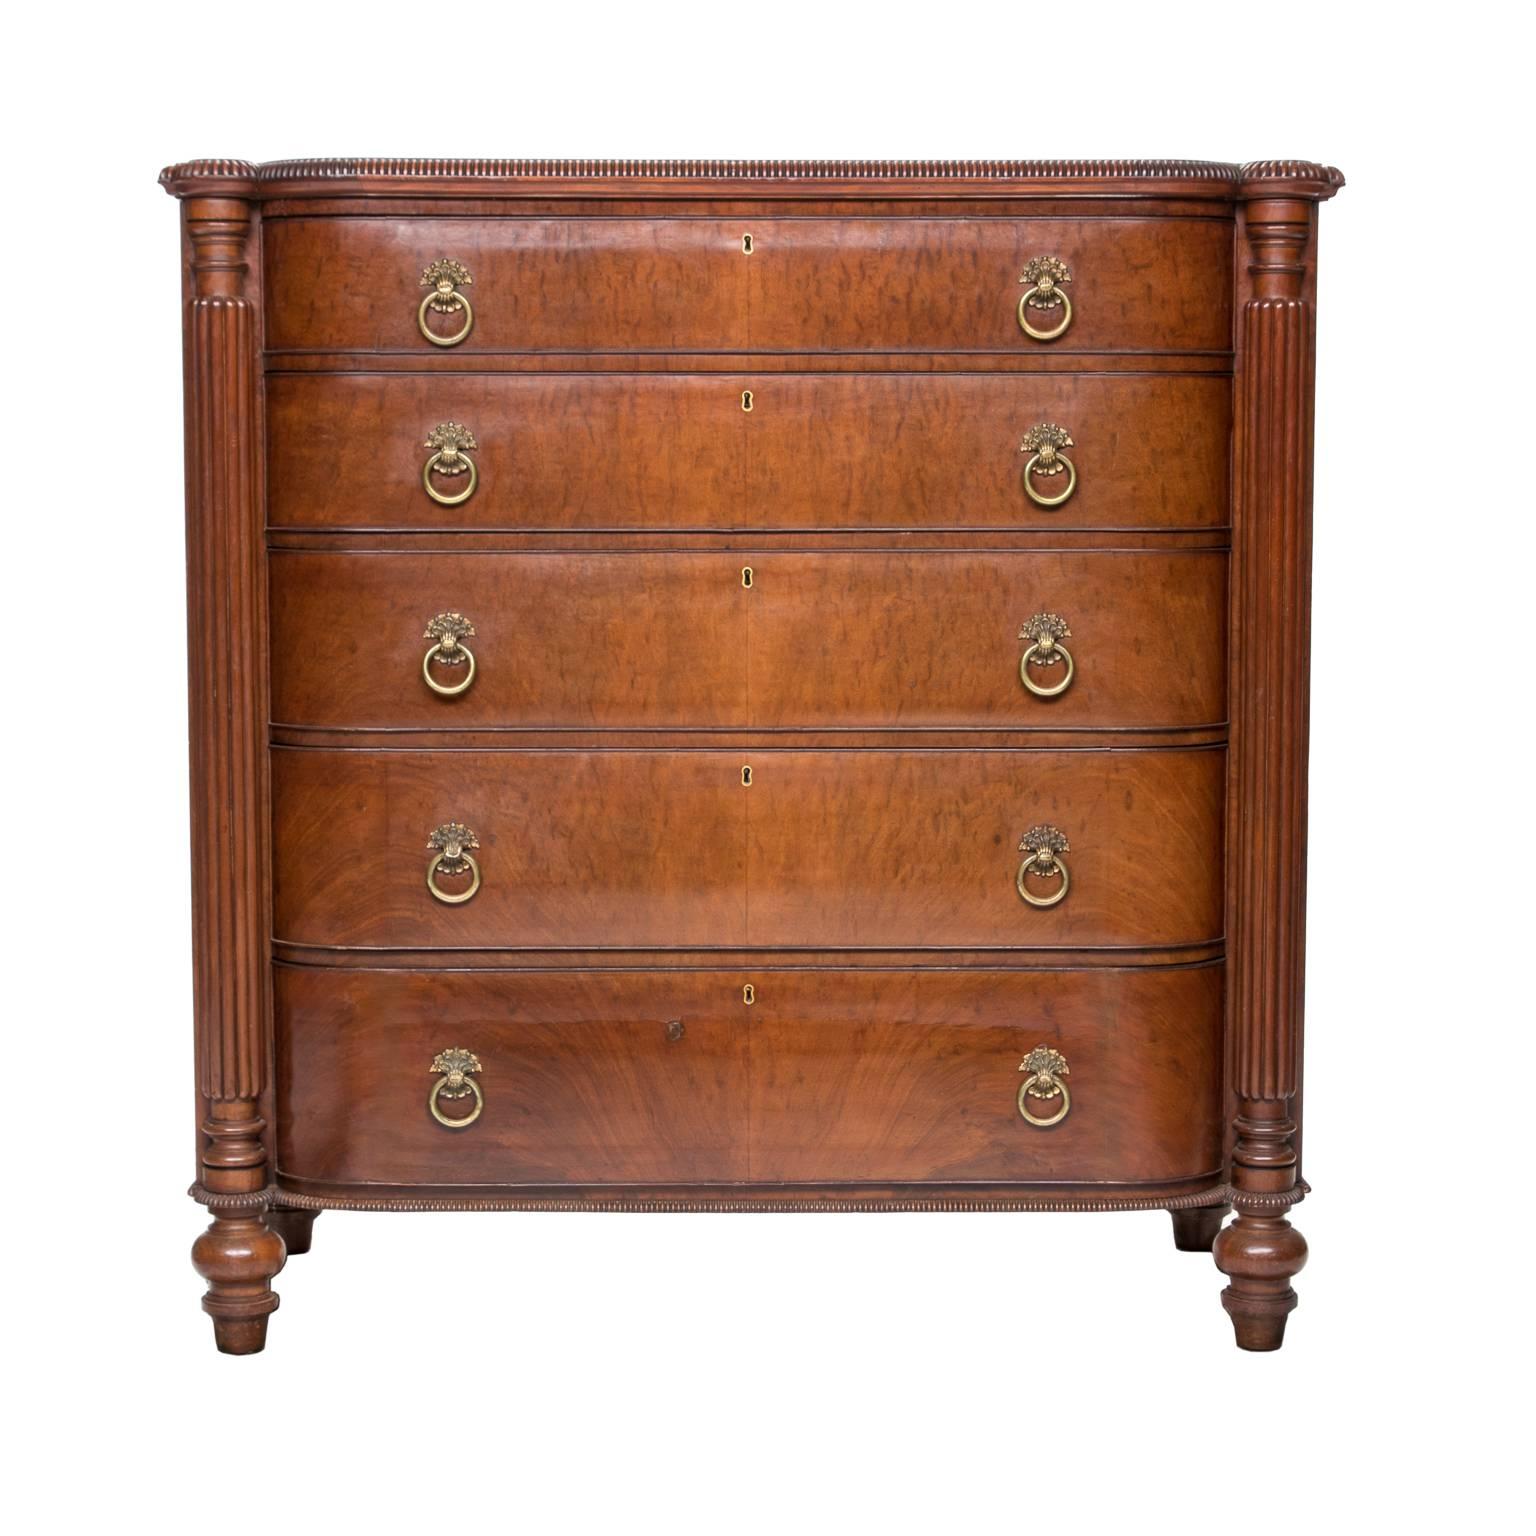 19th C English Regency Tall Chest of Drawers